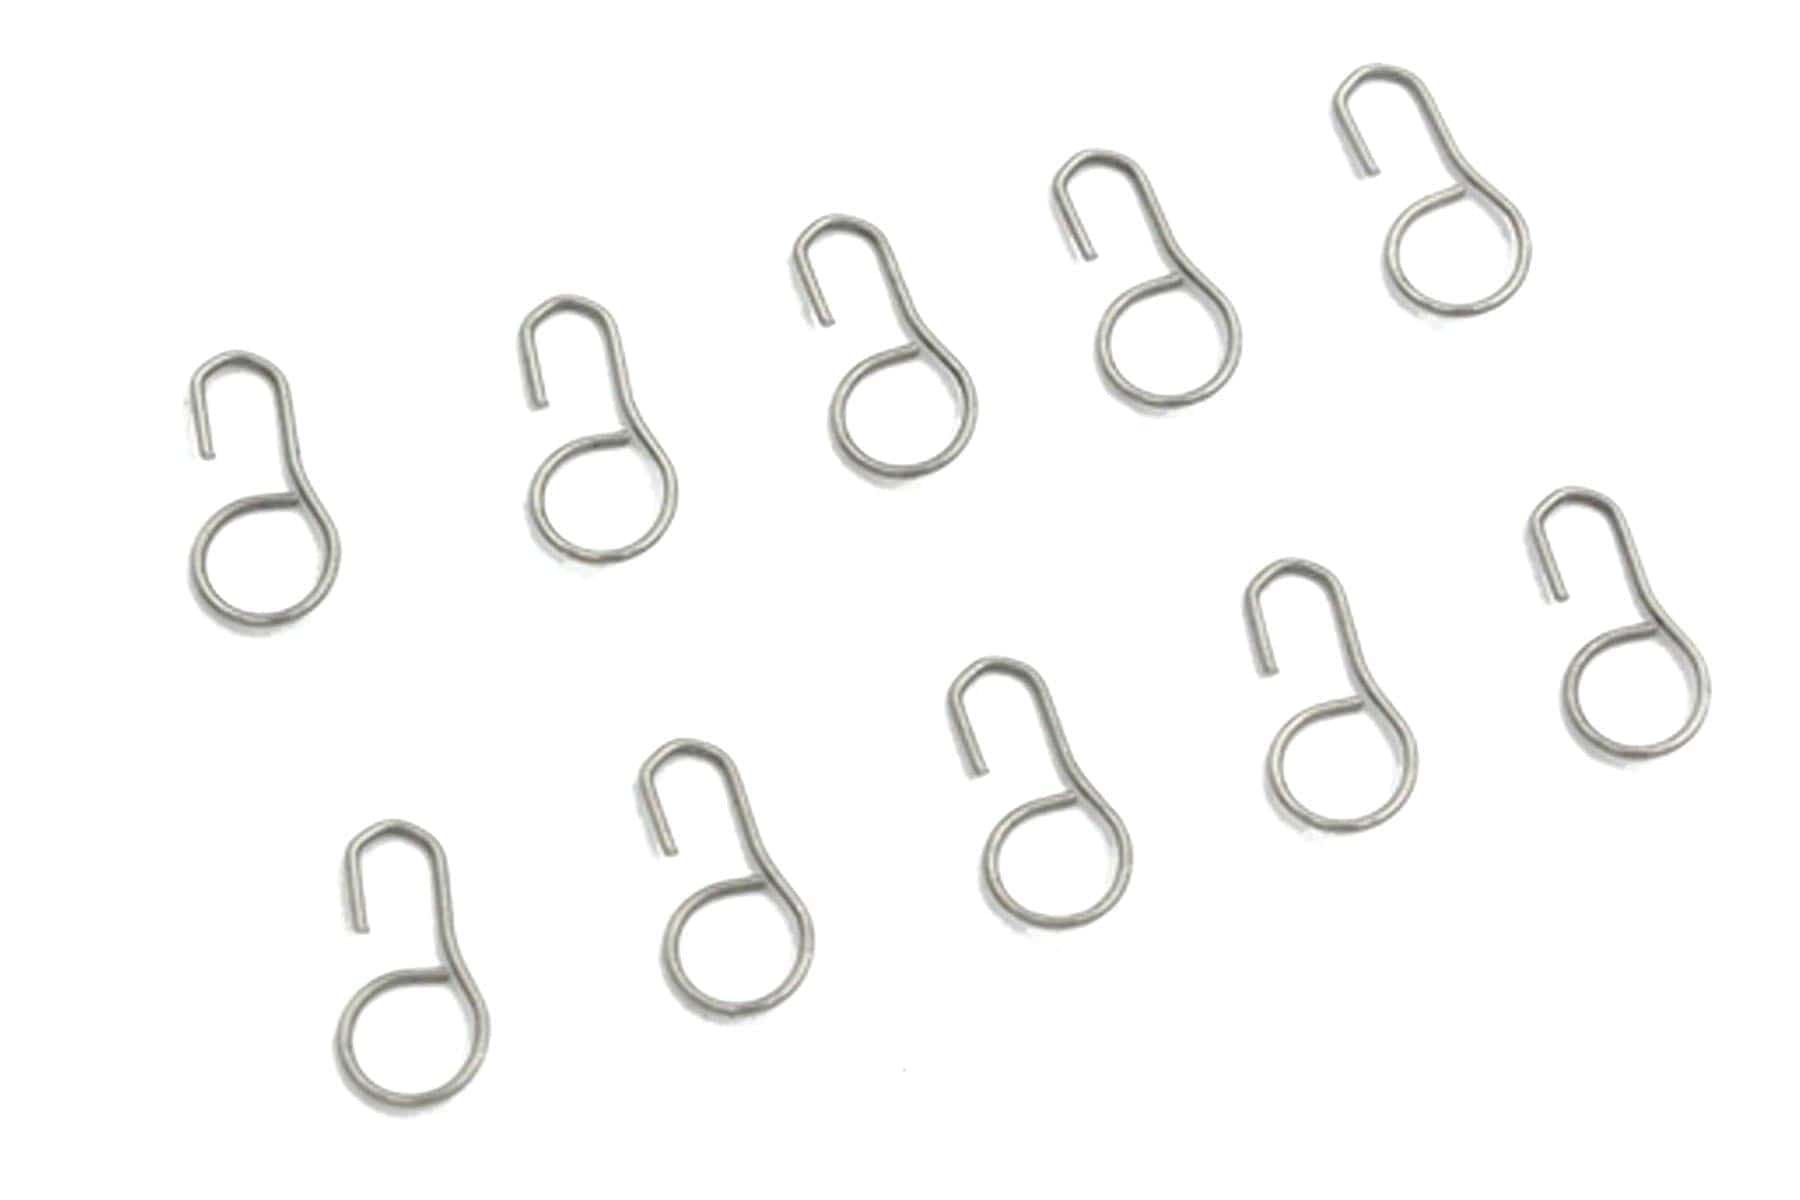 Bancroft Stainless Steel Sail Clew Hook (10 Pcs) BNC1048-118